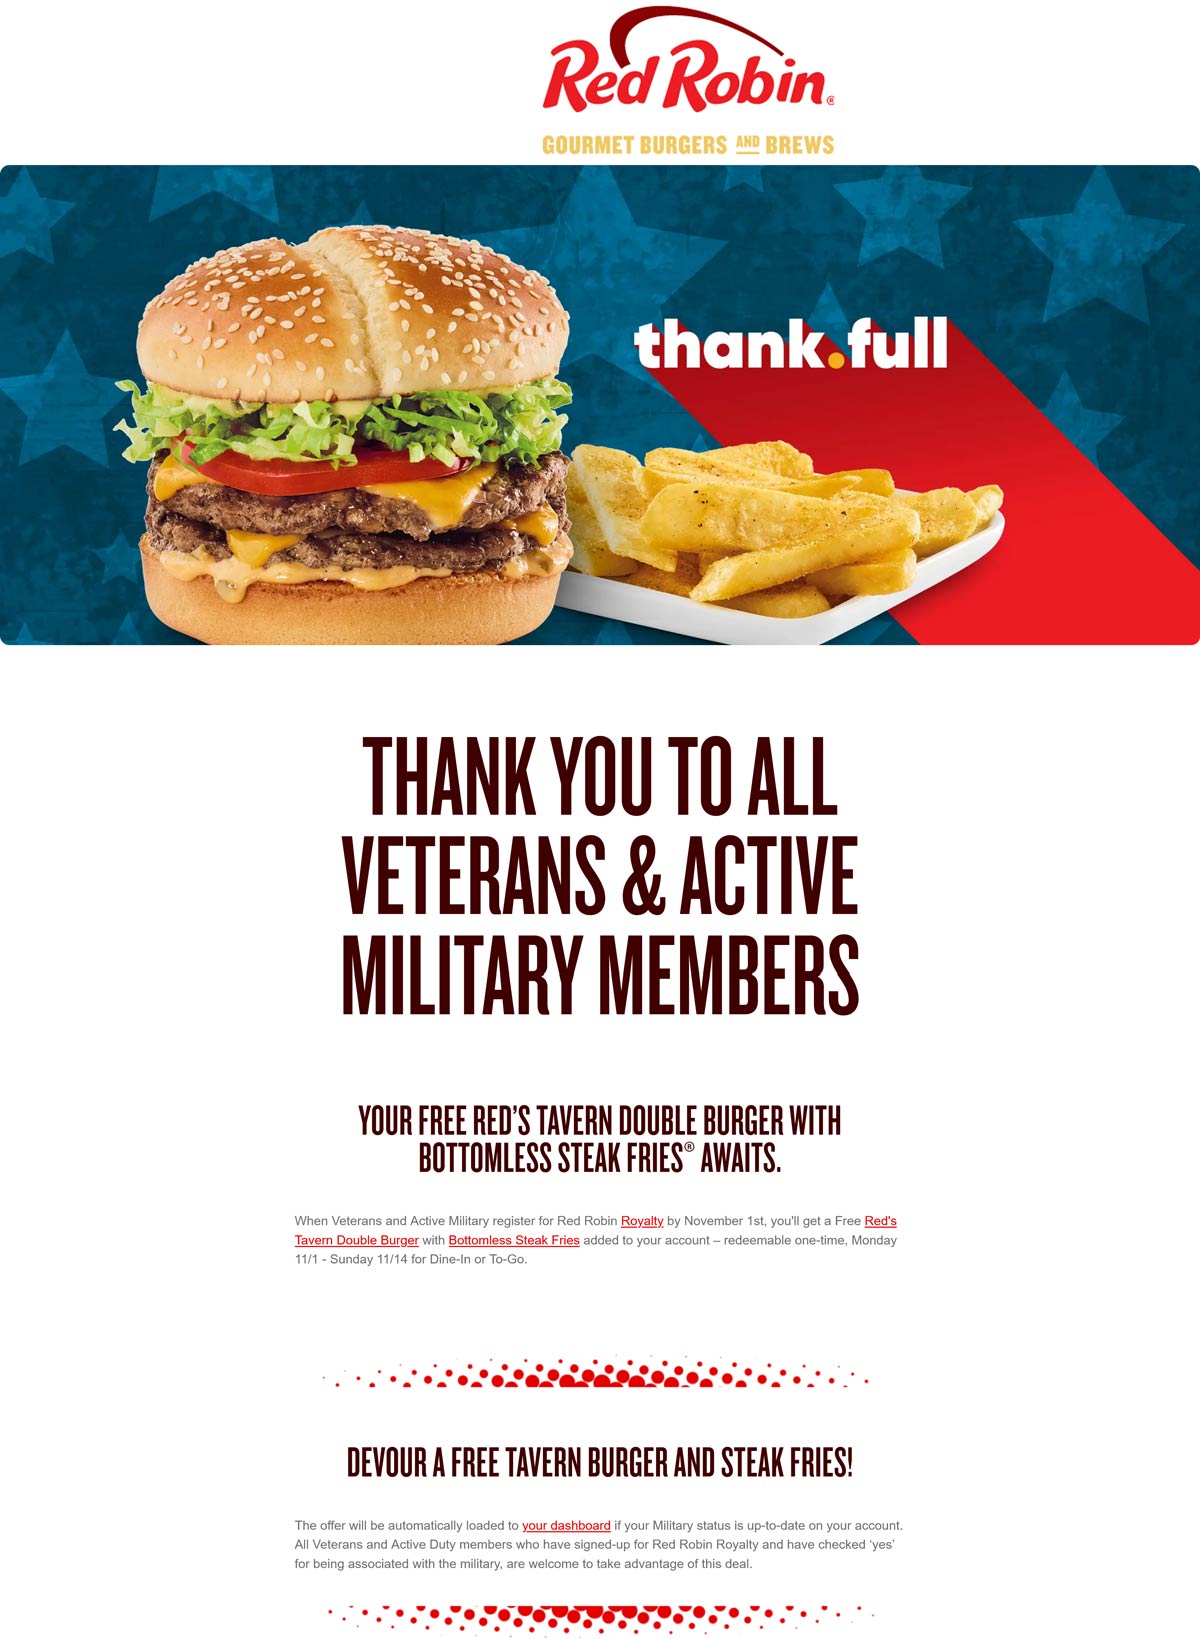 Red Robin restaurants Coupon  Veterans & active enjoy a free double cheeseburger + bottomless fries at Red Robin #redrobin 